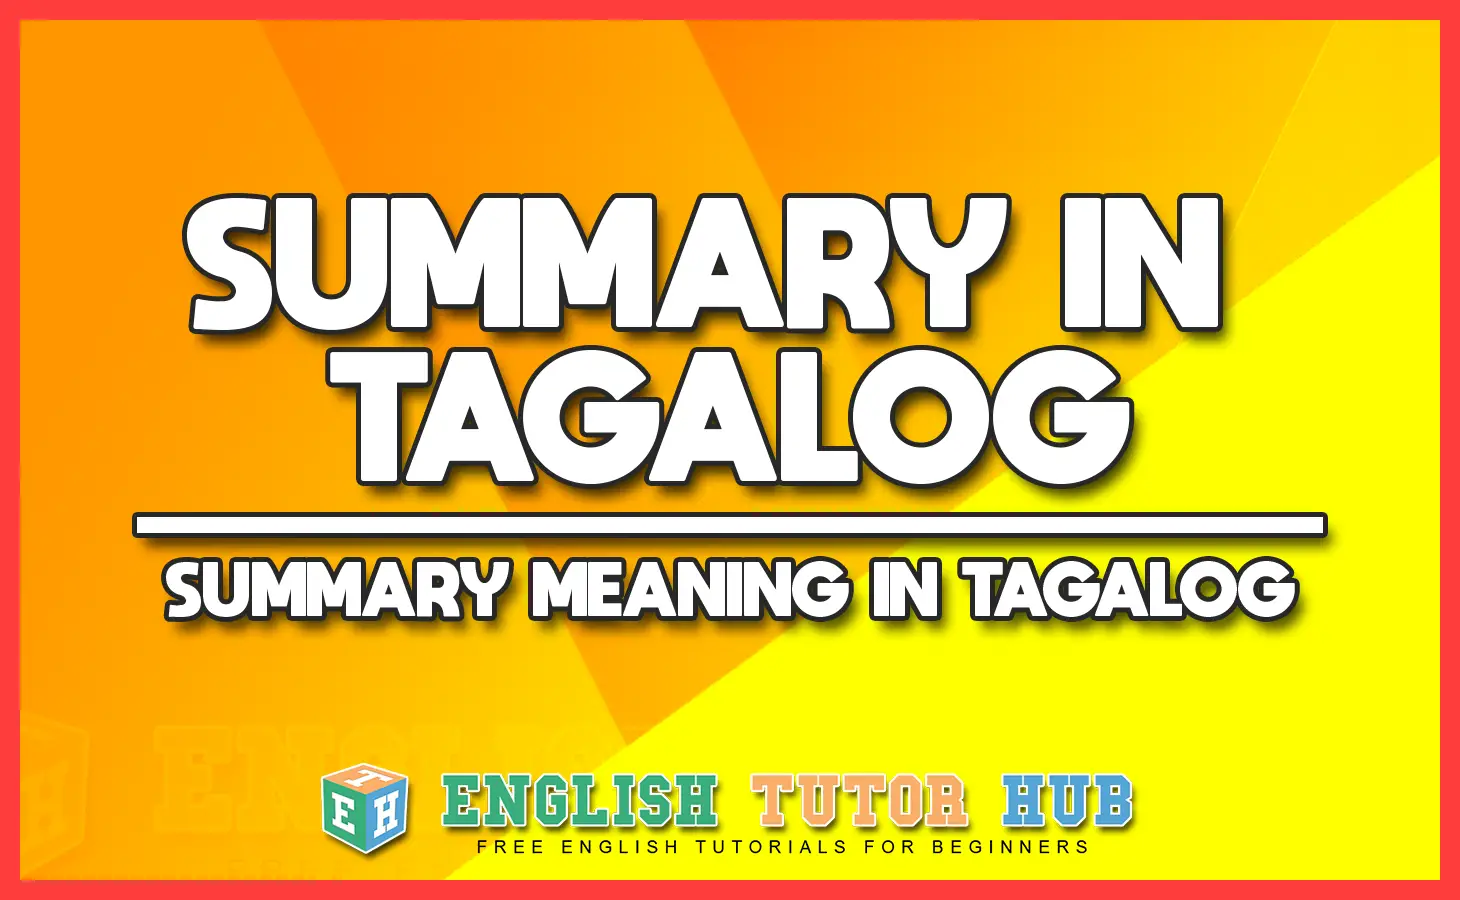 assignment meaning sa tagalog